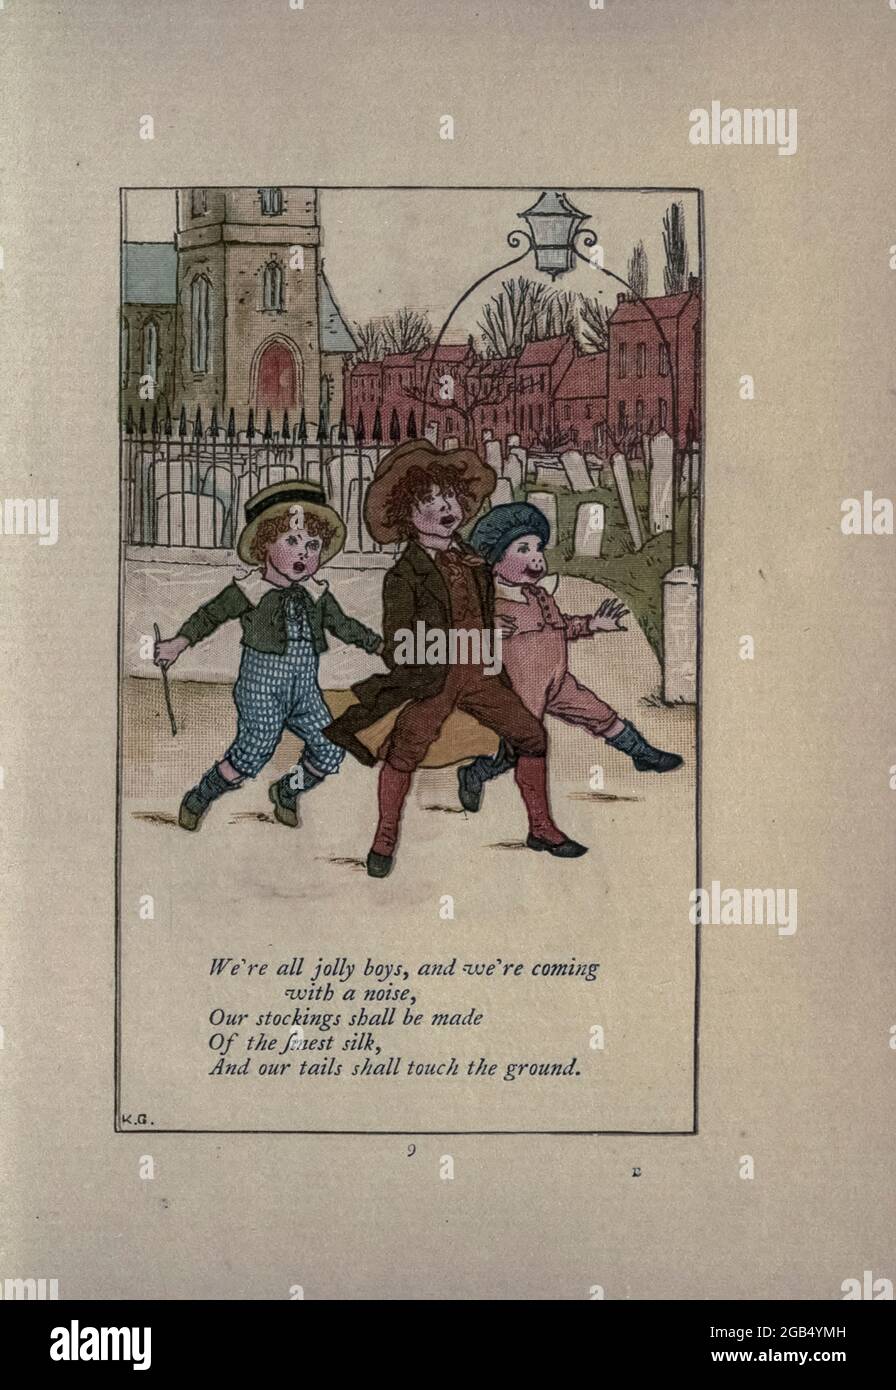 We’re all jolly boys, / and we’re coming with a noise, / Our stockings shall be made Of the finest silk, / And our tails shall touch the ground. // from the book Mother Goose : or, The old nursery rhymes by Kate Greenaway, Engraved and Printed by Edmund Evans published in 1881 by George Routledge and Sons London nad New York Stock Photo